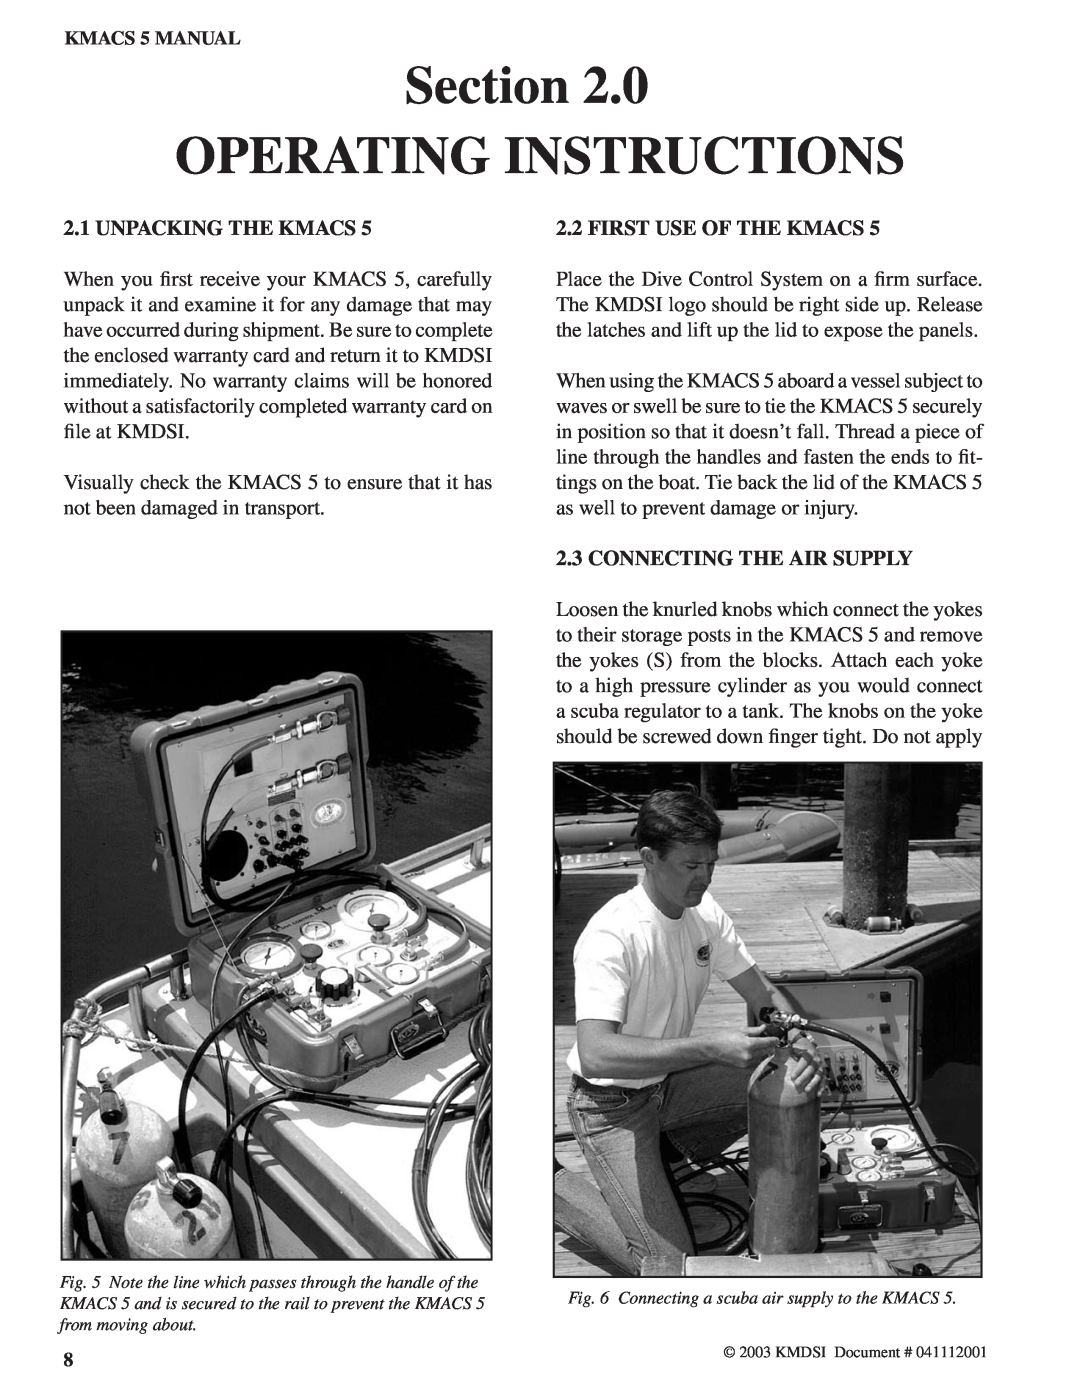 Kirby Air Control System, 5 manual Section OPERATING INSTRUCTIONS, Unpacking The Kmacs, First Use Of The Kmacs 